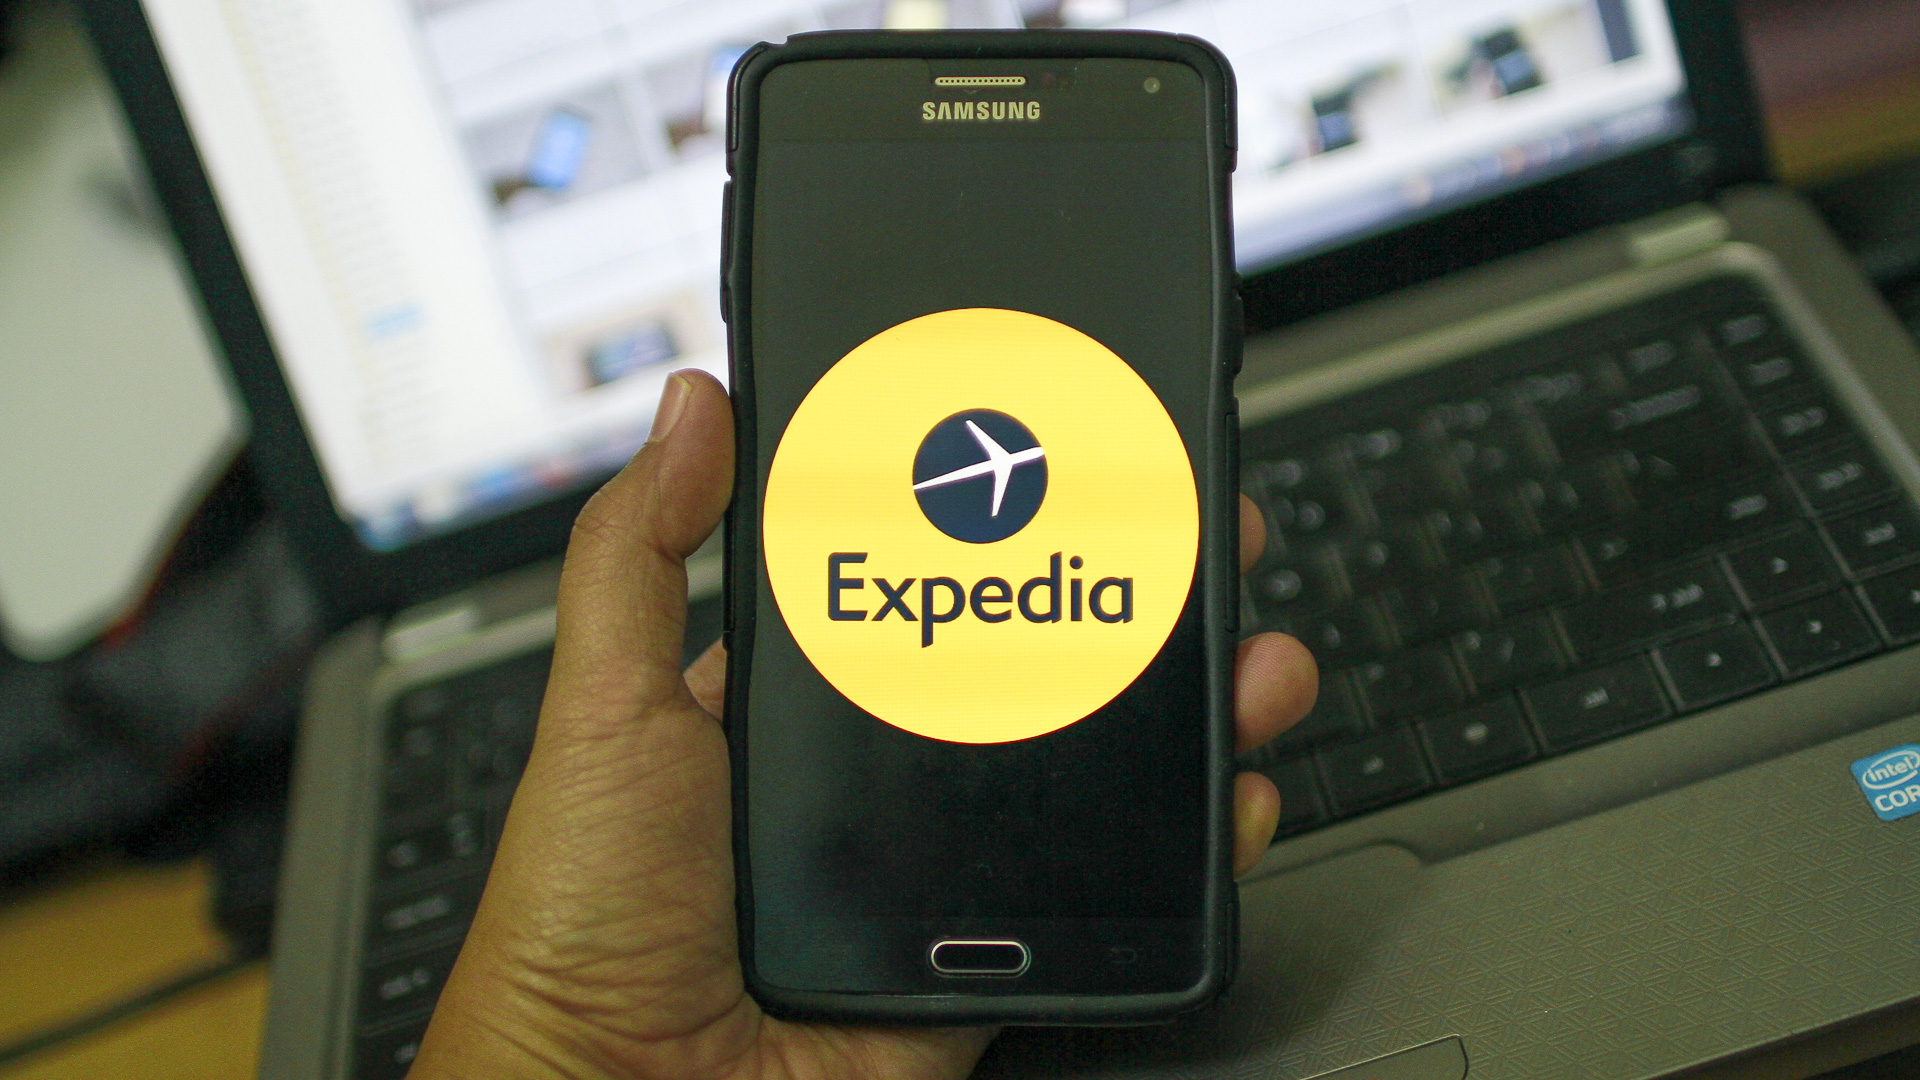 <p>Expedia will not only help its employees score travel deals but will also assist with paying for their trips. The company offers "leisure travel reimbursement" to its U.S.-based employees.</p> <p><em><strong>Dream Job Alert: <a href="https://www.gobankingrates.com/money/jobs/dream-job-alert-10-companies-let-you-work-from-home-have-unlimited-vacation-time/?utm_campaign=1130208&utm_source=msn.com&utm_content=10&utm_medium=rss">These 10 Companies Let You Work From Home AND Have Unlimited Vacation Time</a></strong></em></p>